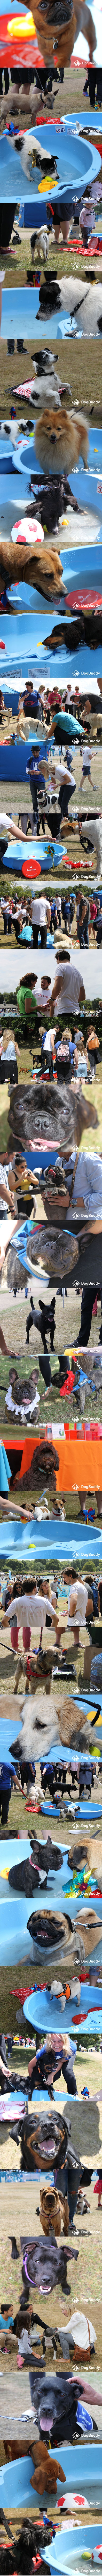 DogBuddy The Mayhew Animal Home Hyde Bark Blog post featuring Staffordshire Bull Terriers, French Bulldogs, Puppies, Pugs, Staffie Frenchie cross, Jack Russells, Bull Terrier, Chow Chow, Mayhew, Hownd, DogBuddy, Richard Setterwall, Collie, Kate Lawler, Kate Lawler's dog, Chocolate Labradors, Golden Retrievers, Shar Pei, Vizsla and a Rottweiler in a dog paddling pool